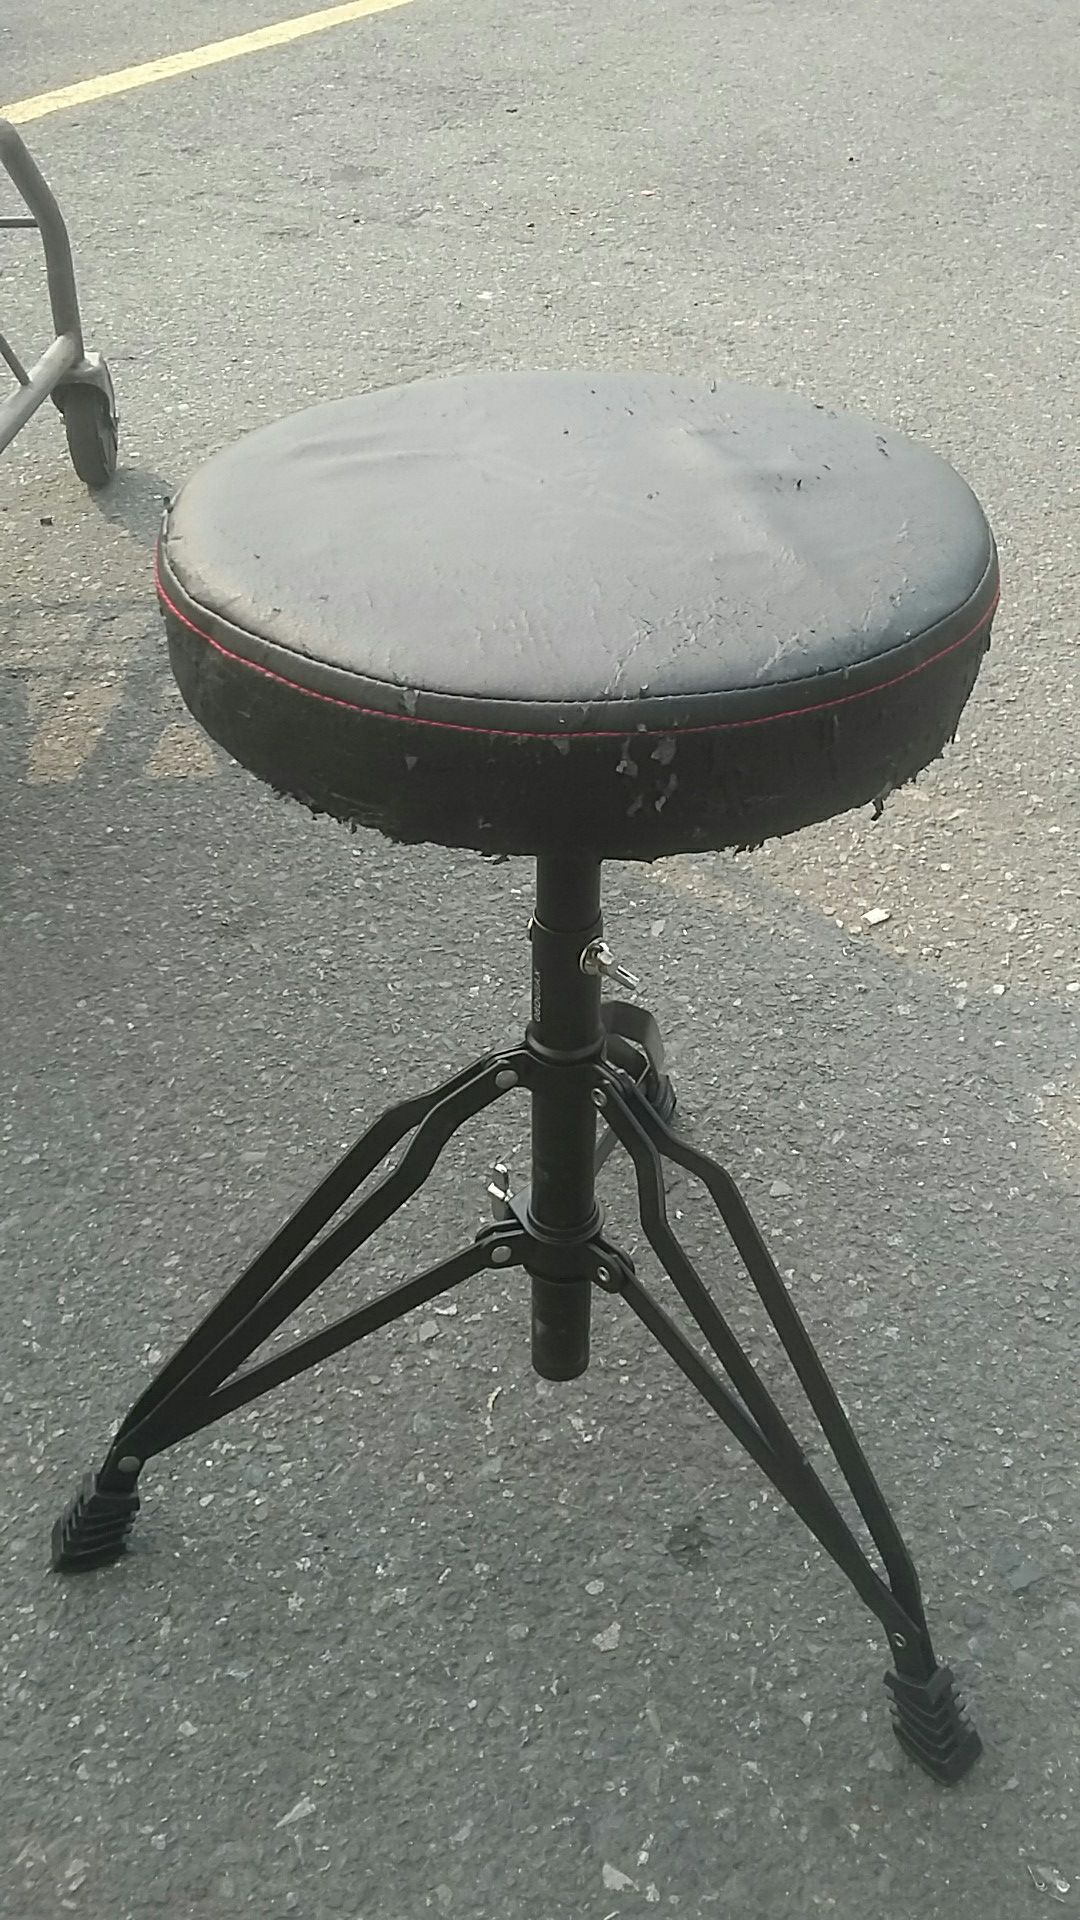 Good condition, (cushion starting to fray) First Act brand collapsible drum seat